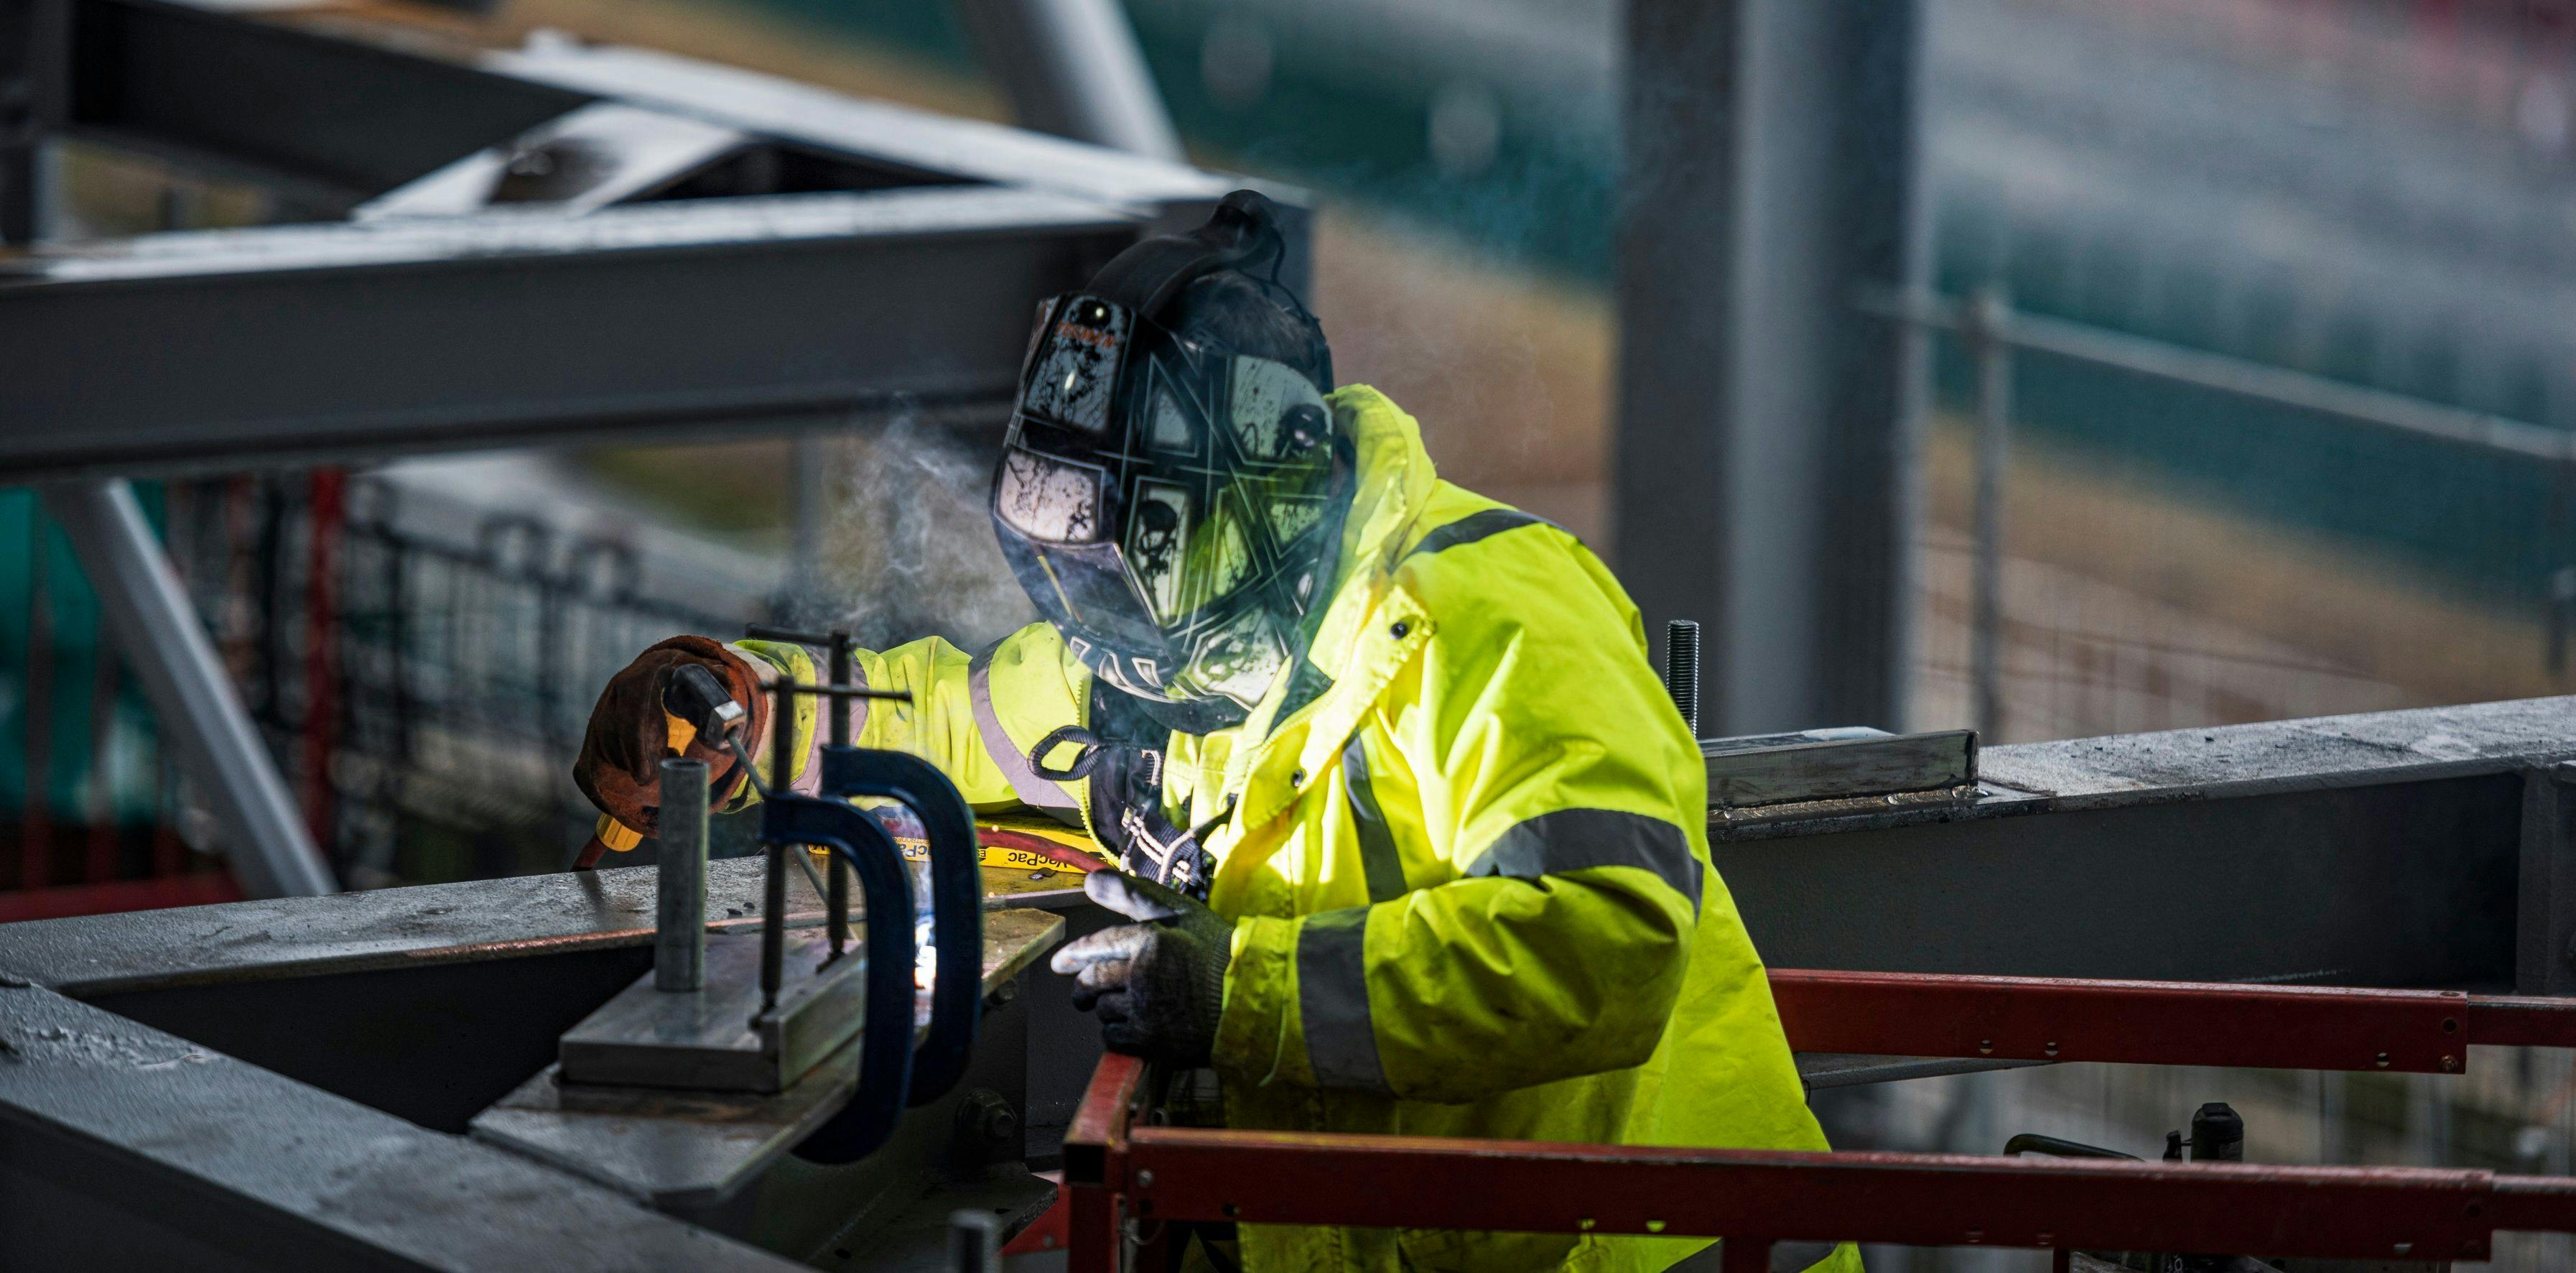 A man welding in a visibility suit